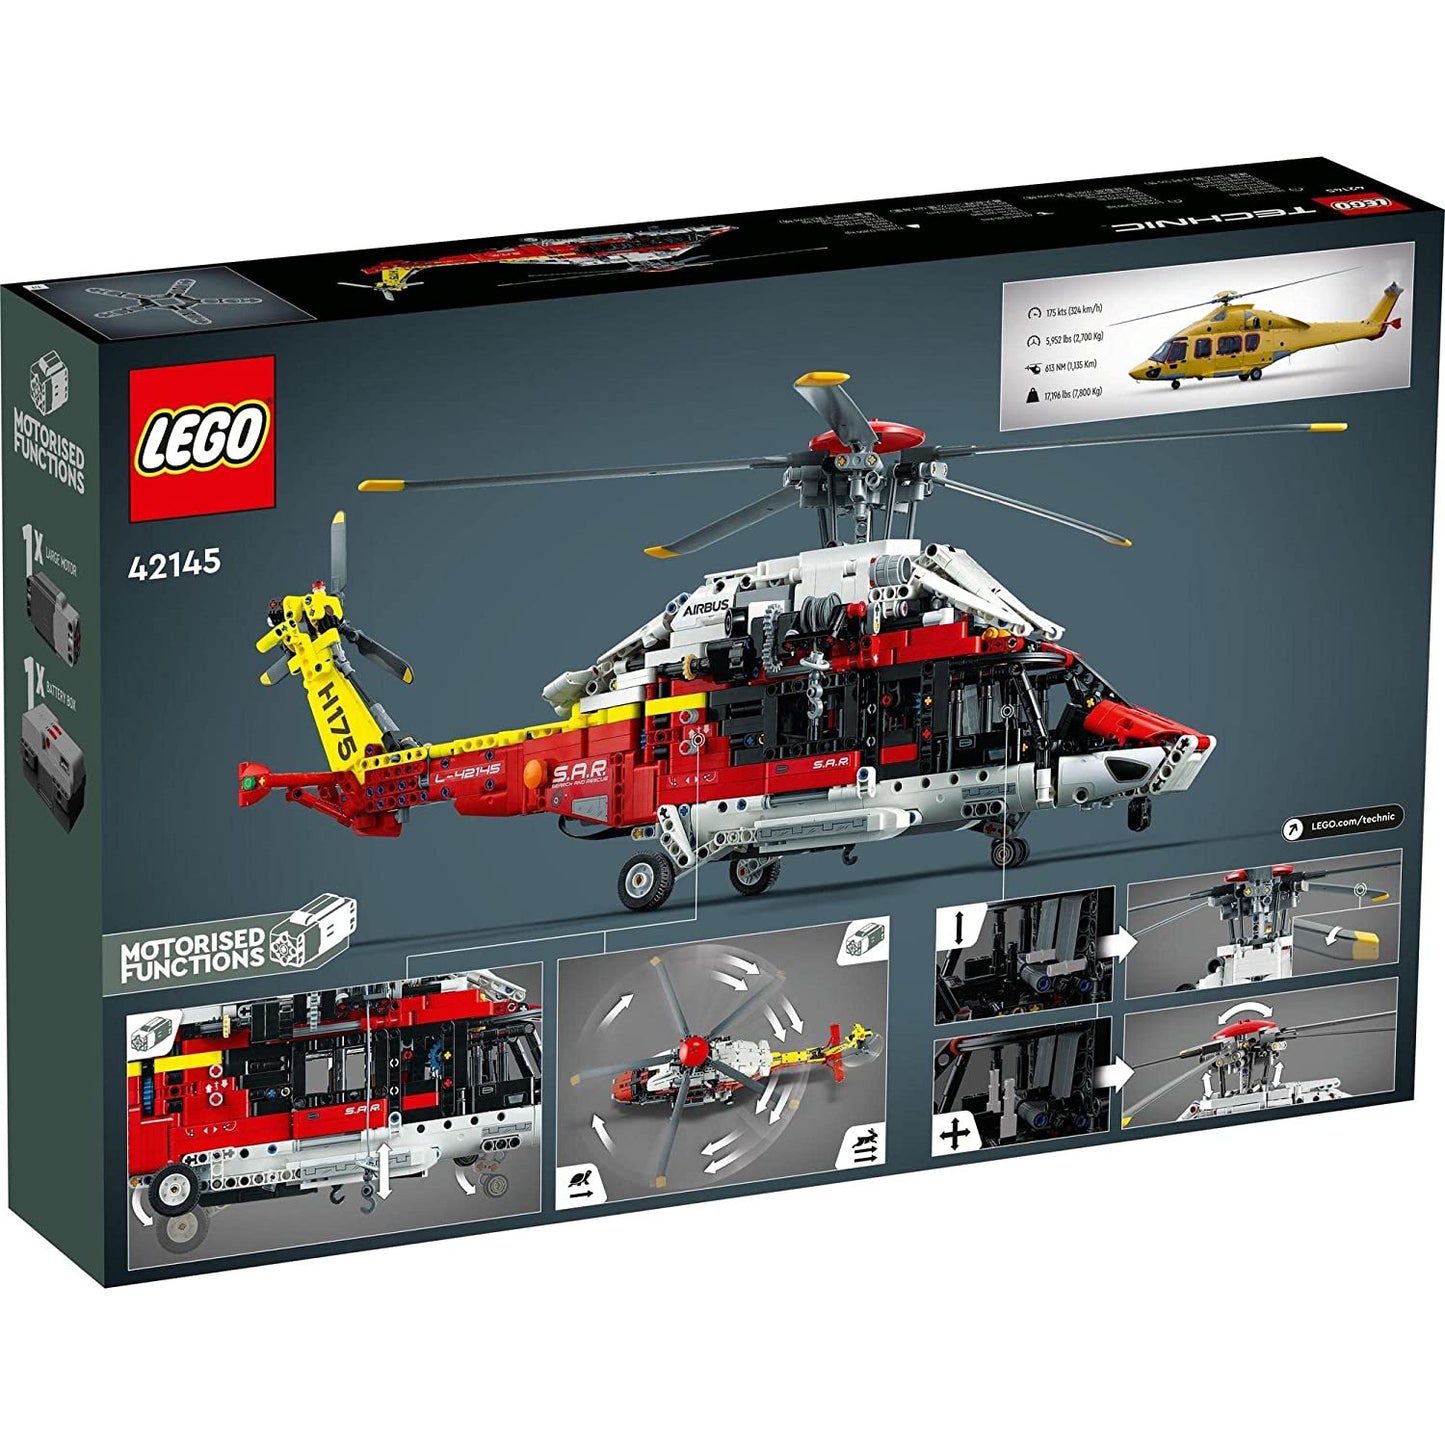 LEGO Technic Airbus H175 Rescue Helicopter 42145 5